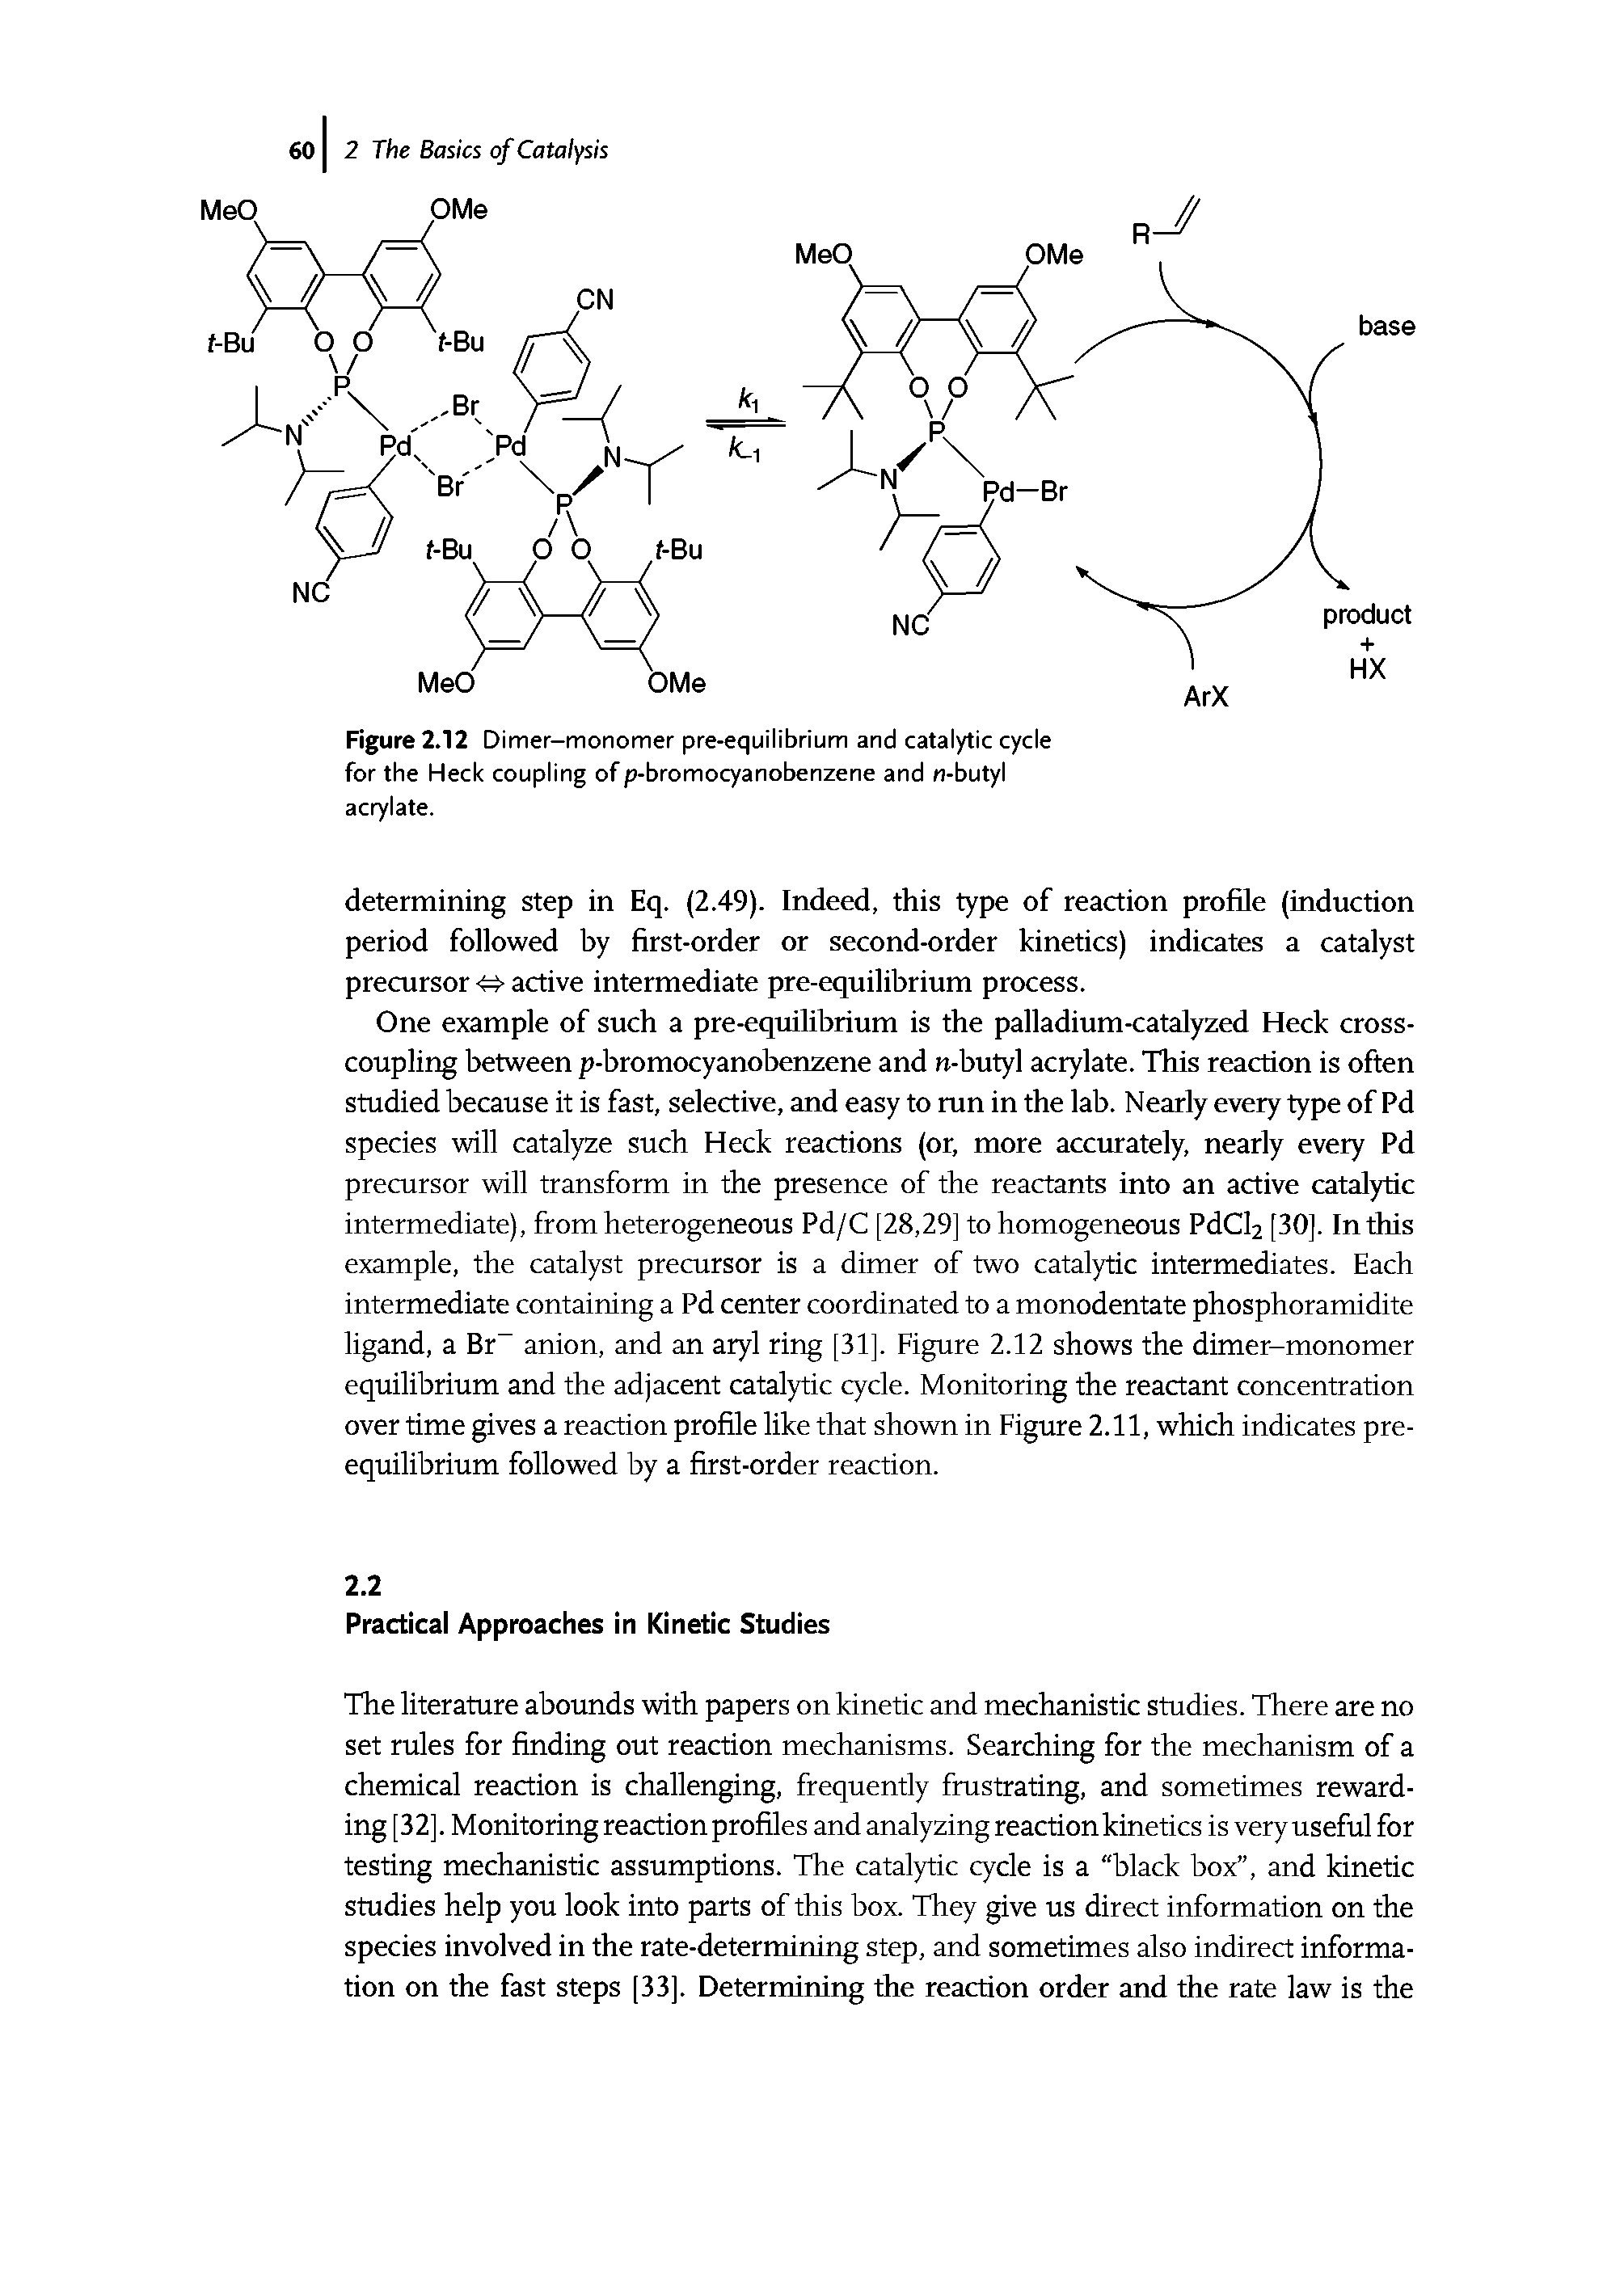 Figure 2.12 Dimer-monomer pre-equilibrium and catalytic cycle for the Heck coupling of p-bromocyanobenzene and n-butyl acrylate.